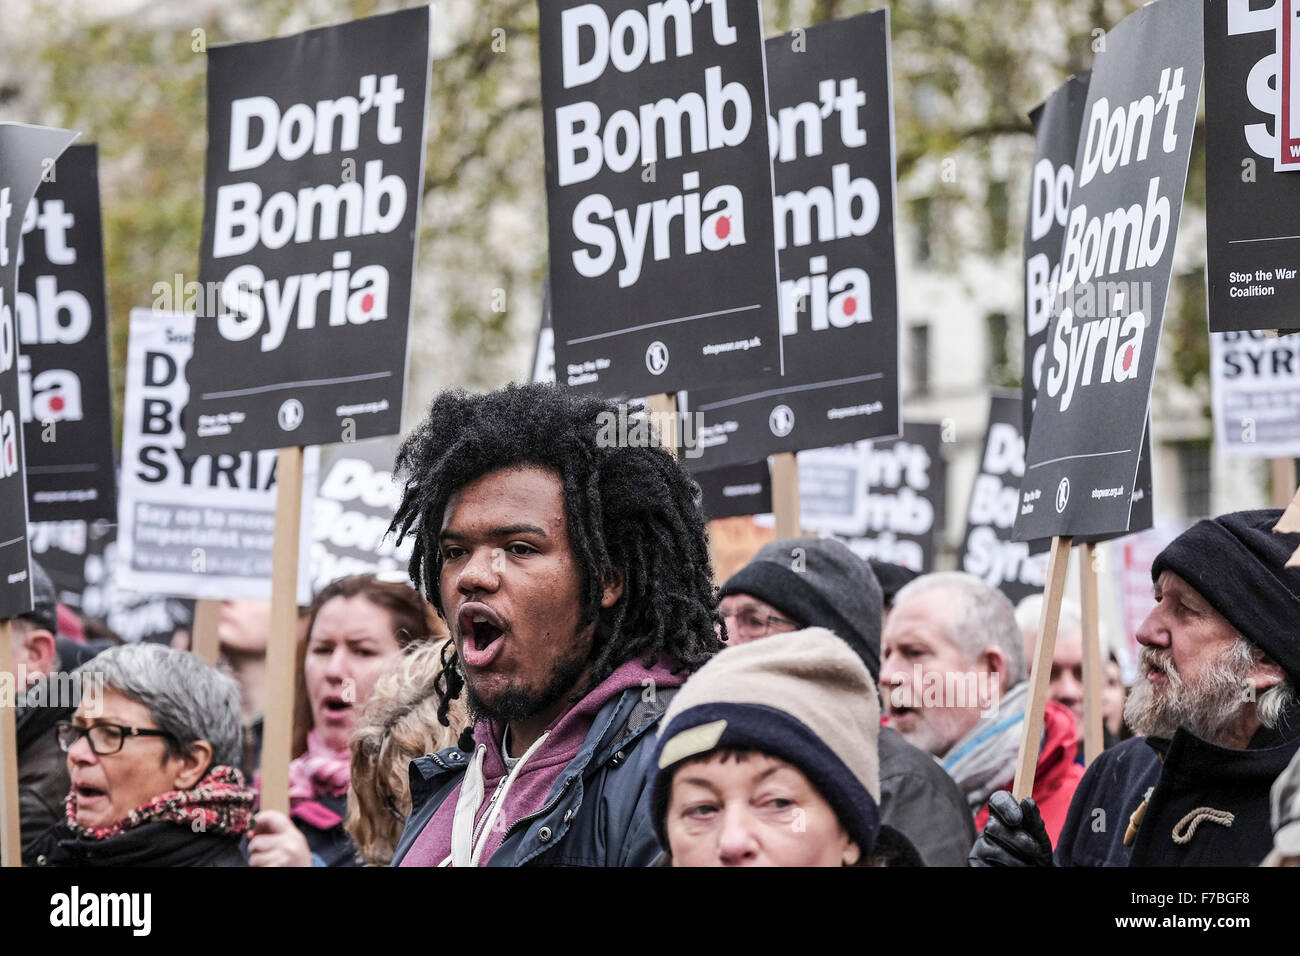 London, UK, 28th November, 2015.  Protesters vent their anger at a demonstration against the UK government proposal to commence bombing Syria.  Credit: Gordon Scammell/Alamy Live News Stock Photo